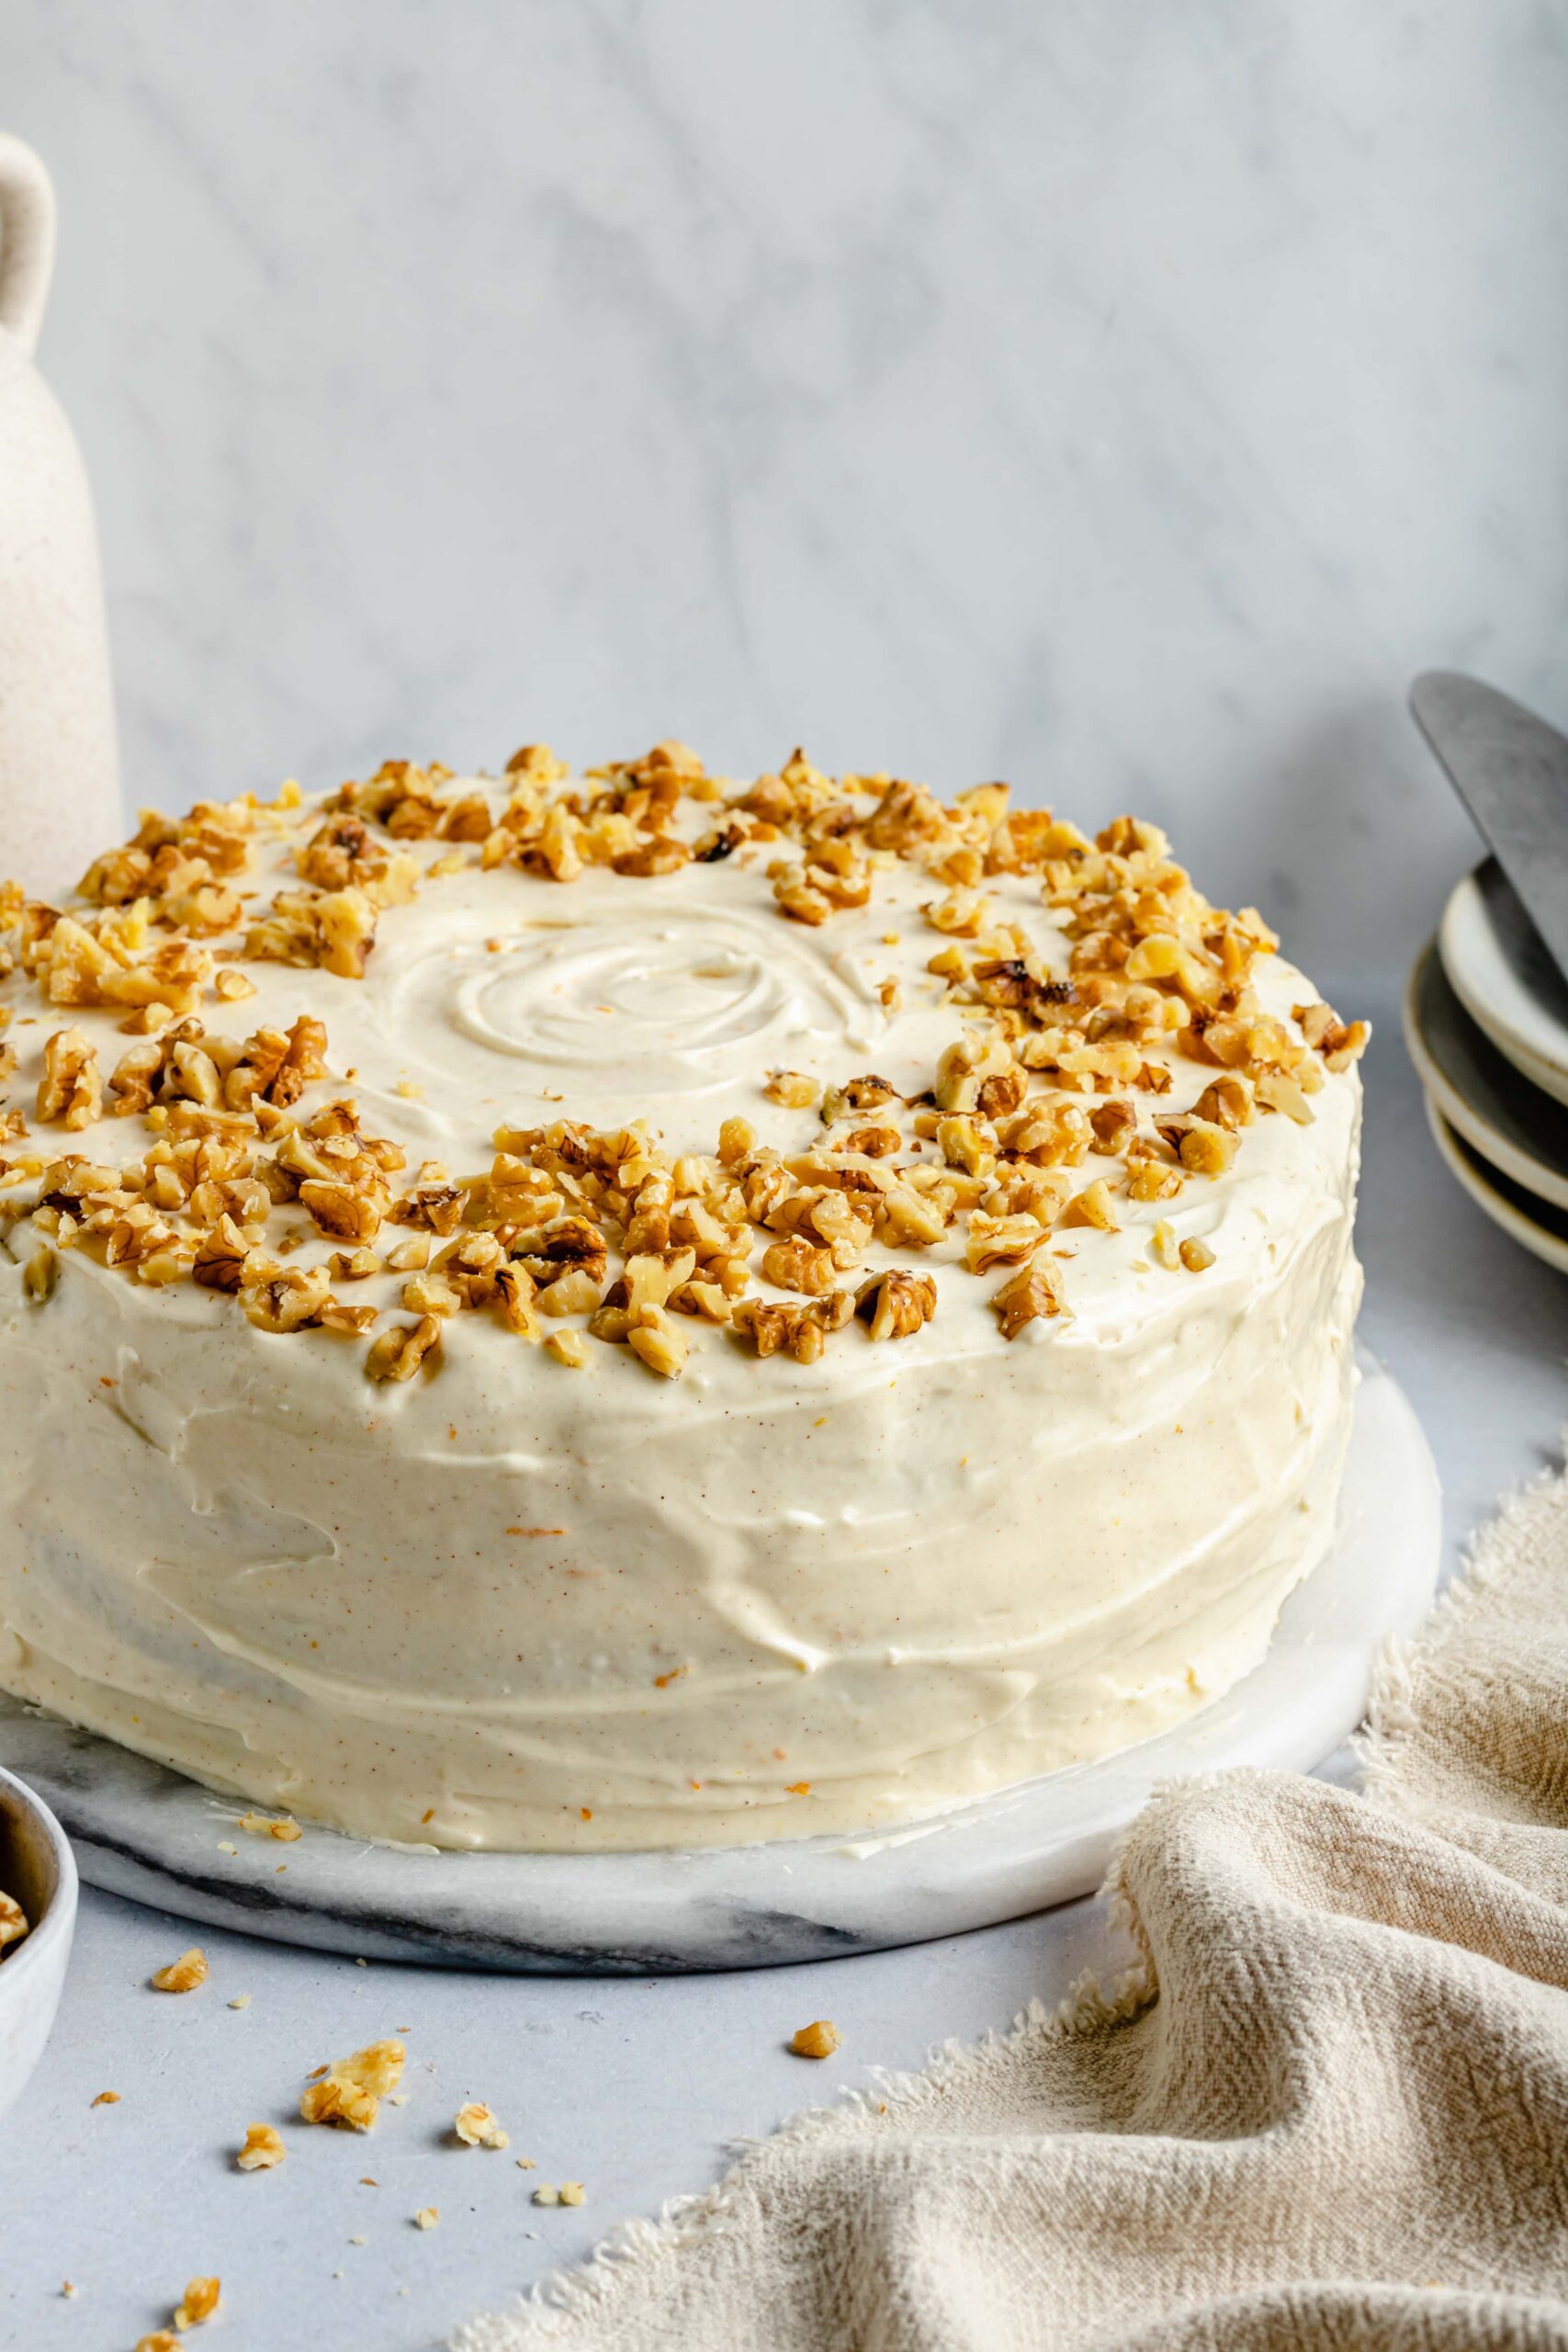 carrot cake topped with walnuts